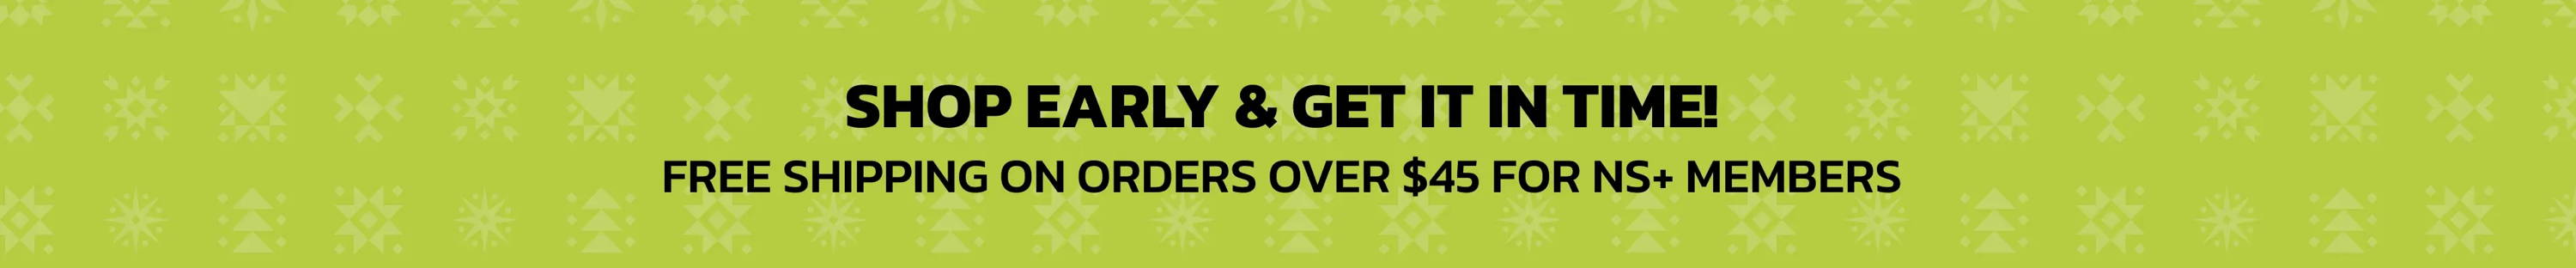 Shop Early & Get It In Time! Free Shipping On Orders $45+ For NS+ Rewards Members